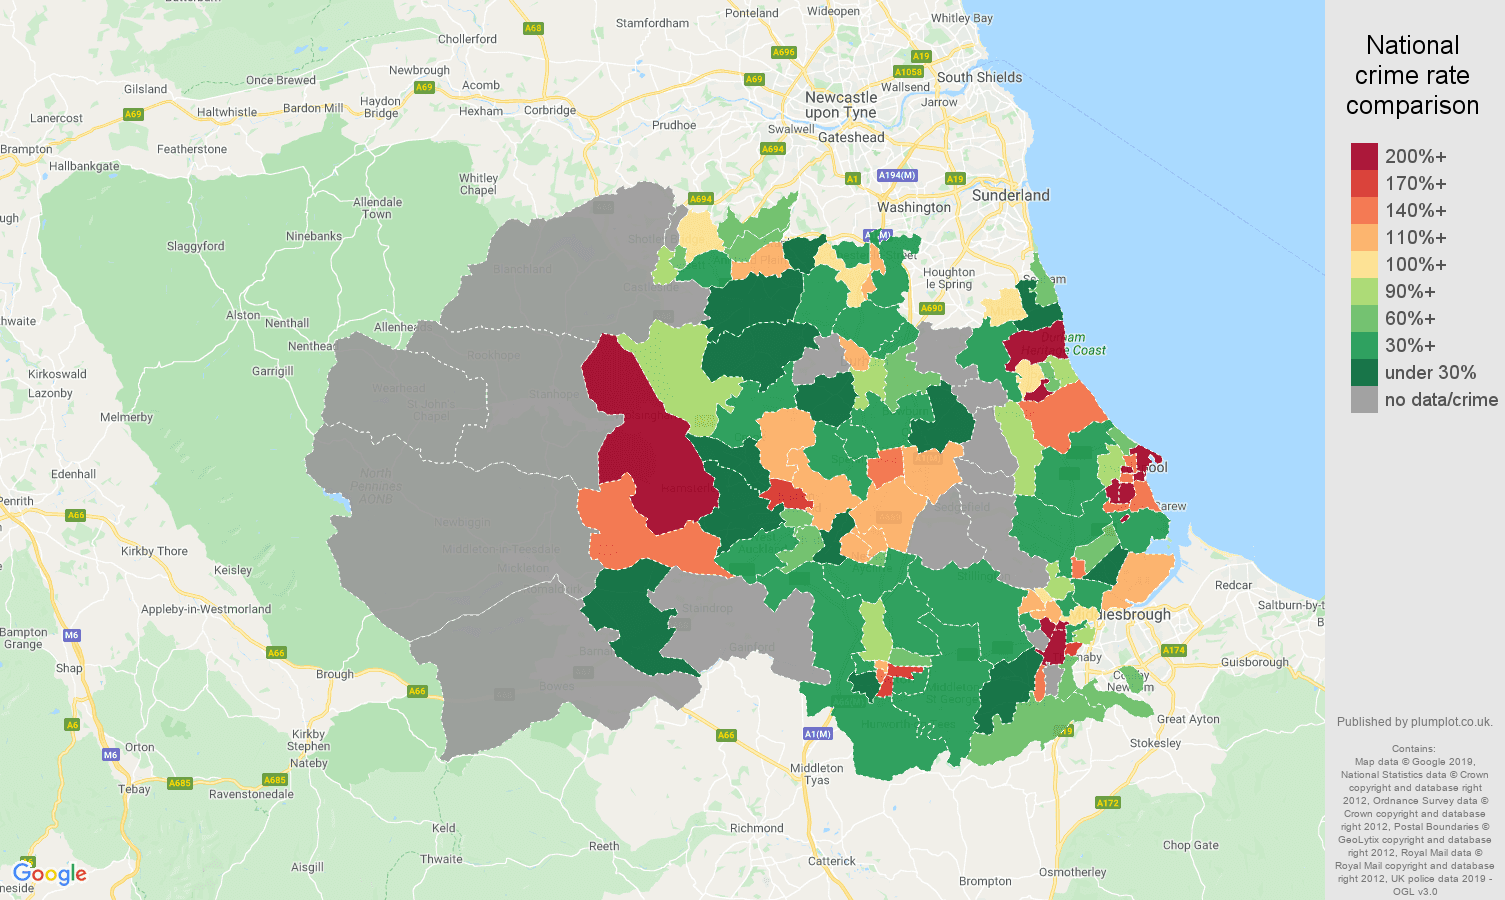 Durham county possession of weapons crime rate comparison map